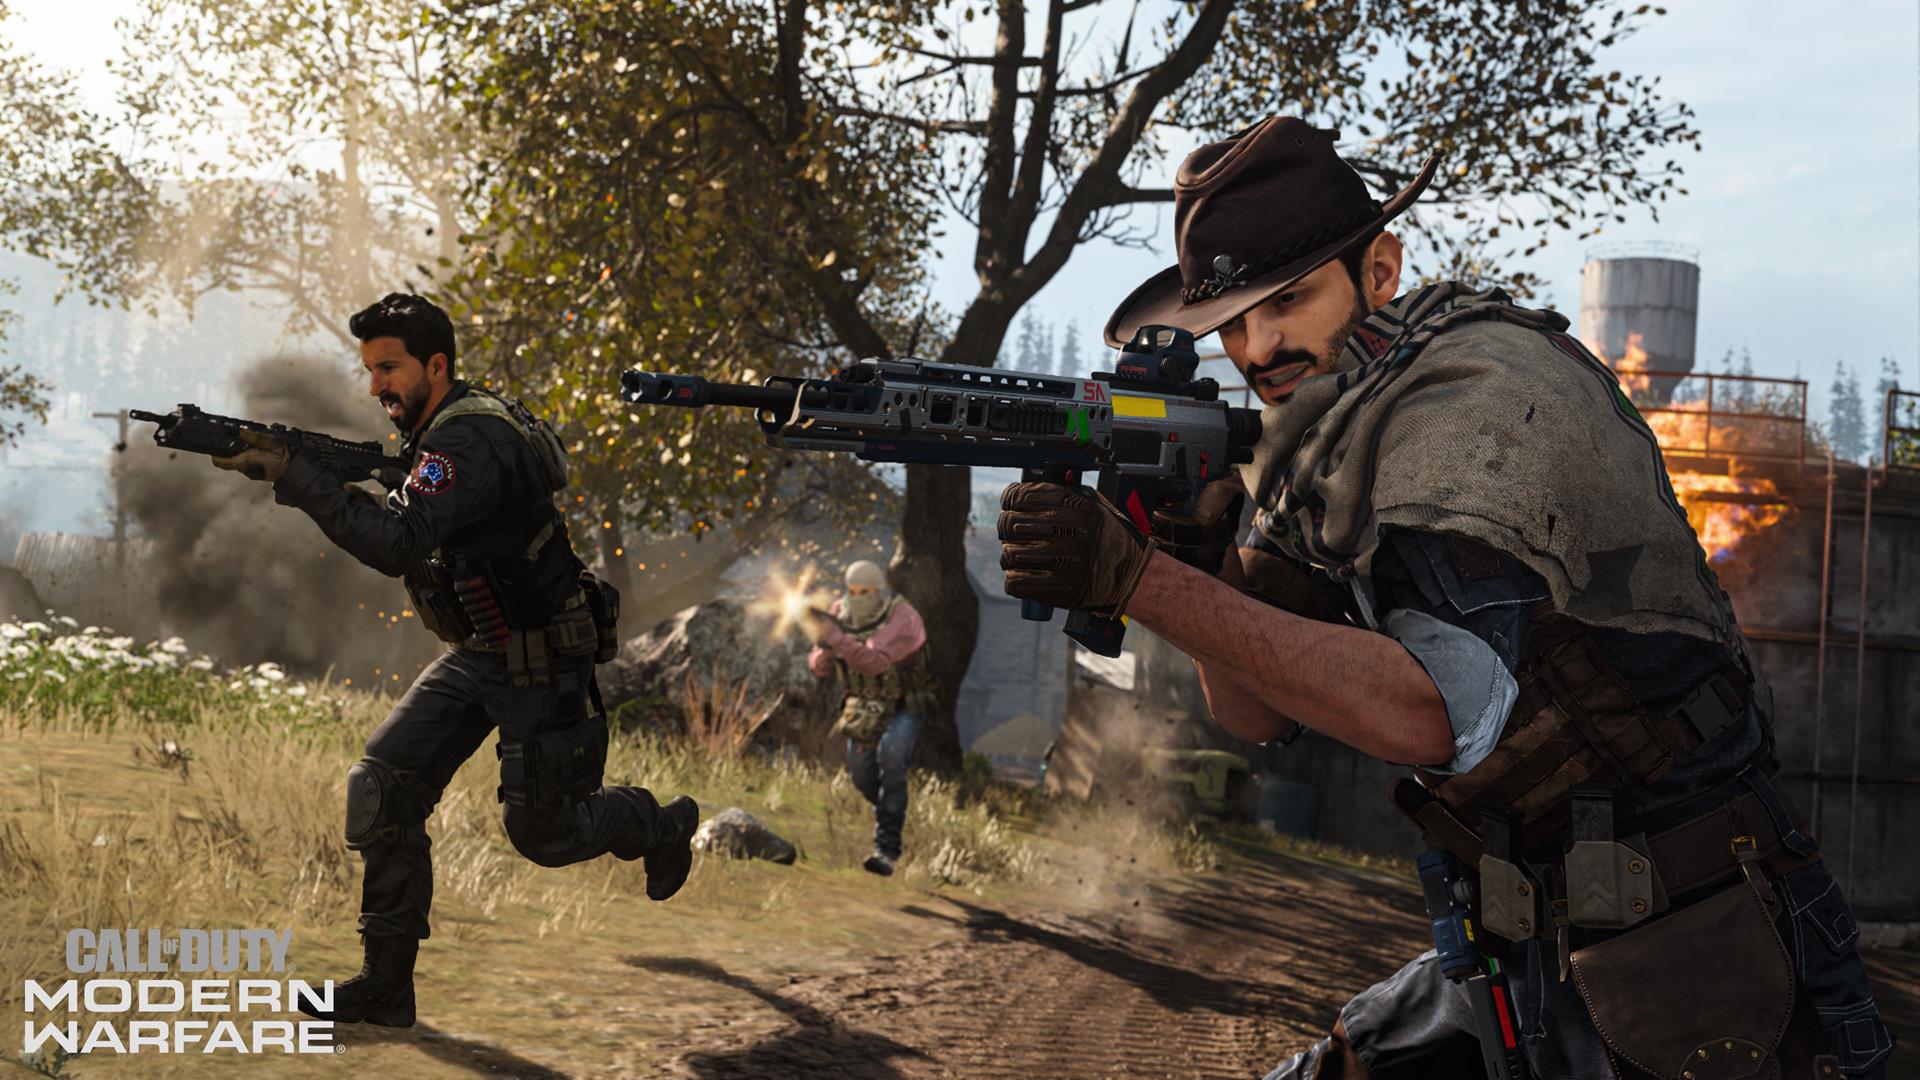 Image for Activision says no Call of Duty account hacks have occurred, no details compromised